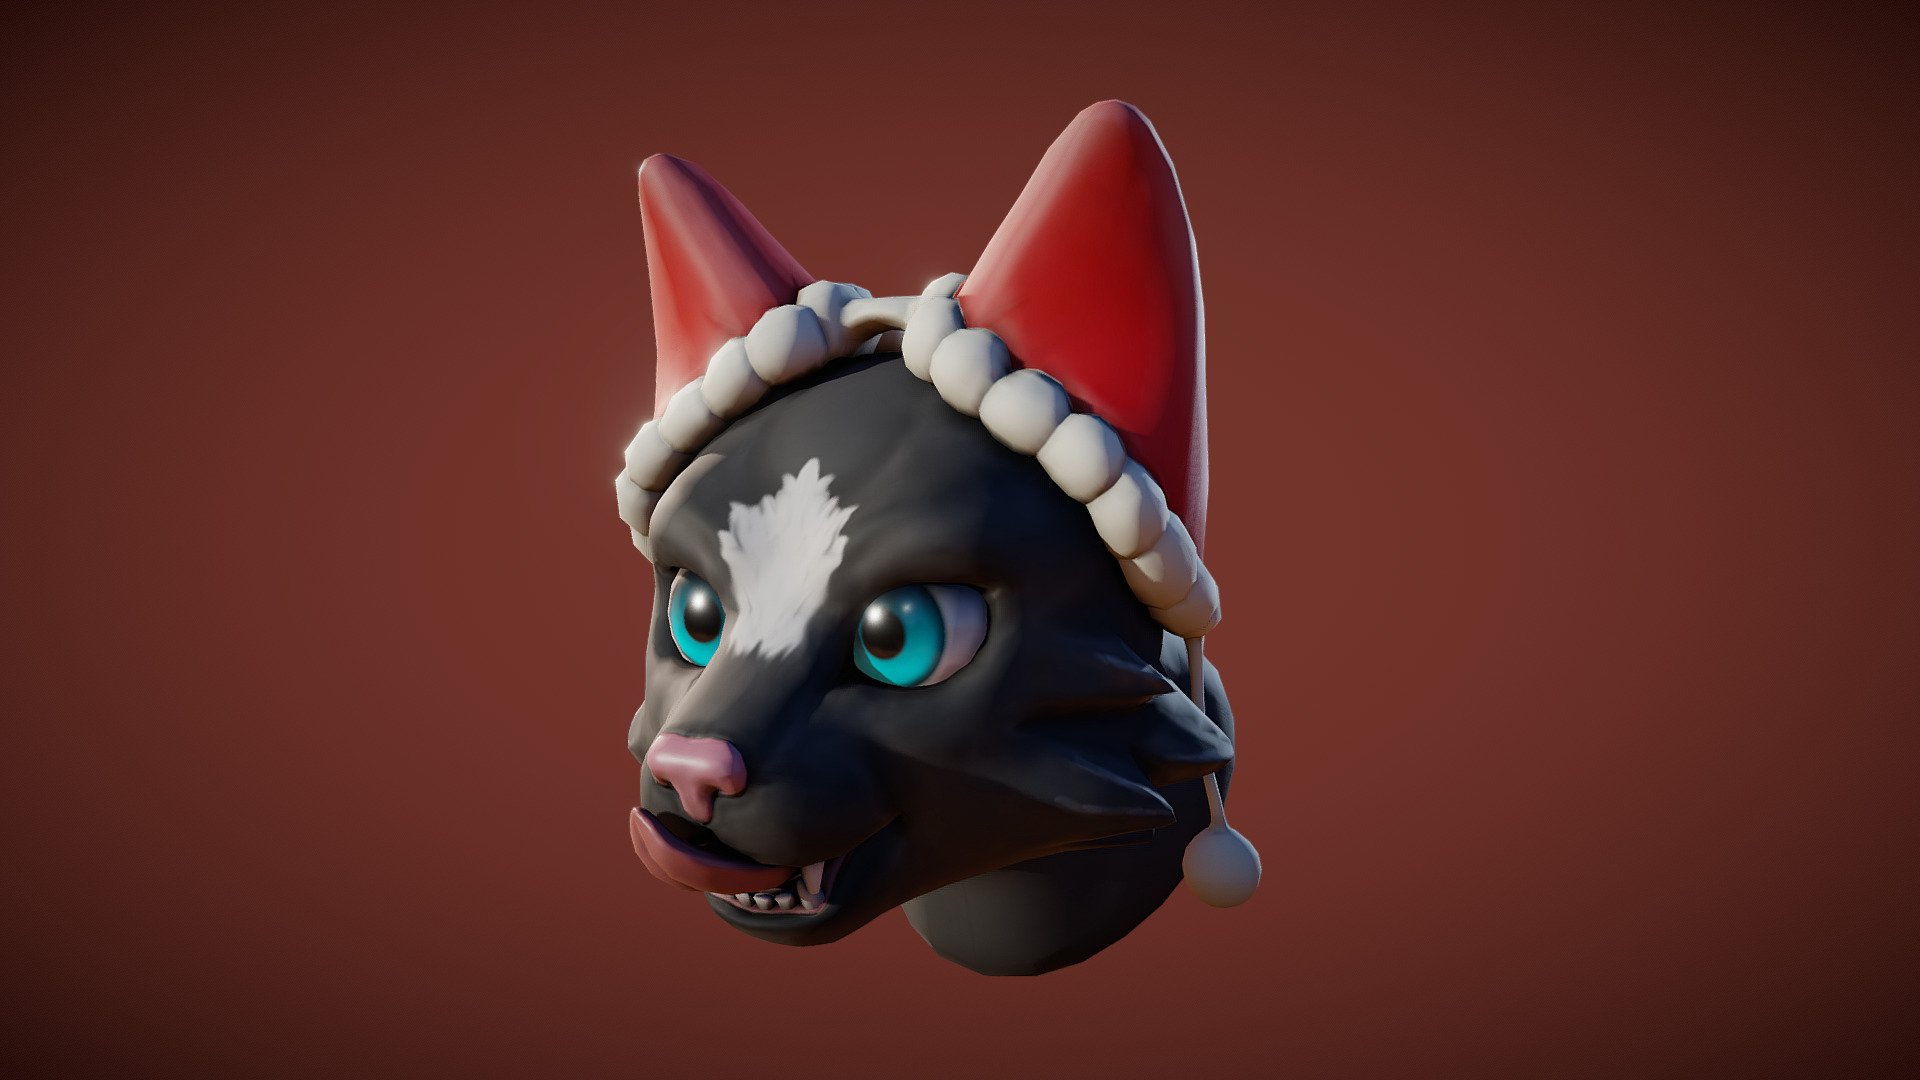 Made for the 3December Challenge. Day 8 - Earmuffs

A little cat with earmuffs for the cold days. Almost looks like a panther or is it just me? - 3December2018 Day8 - Cat Earmuffs - 3D model by Fabian Ernst (@fernst) 3d model